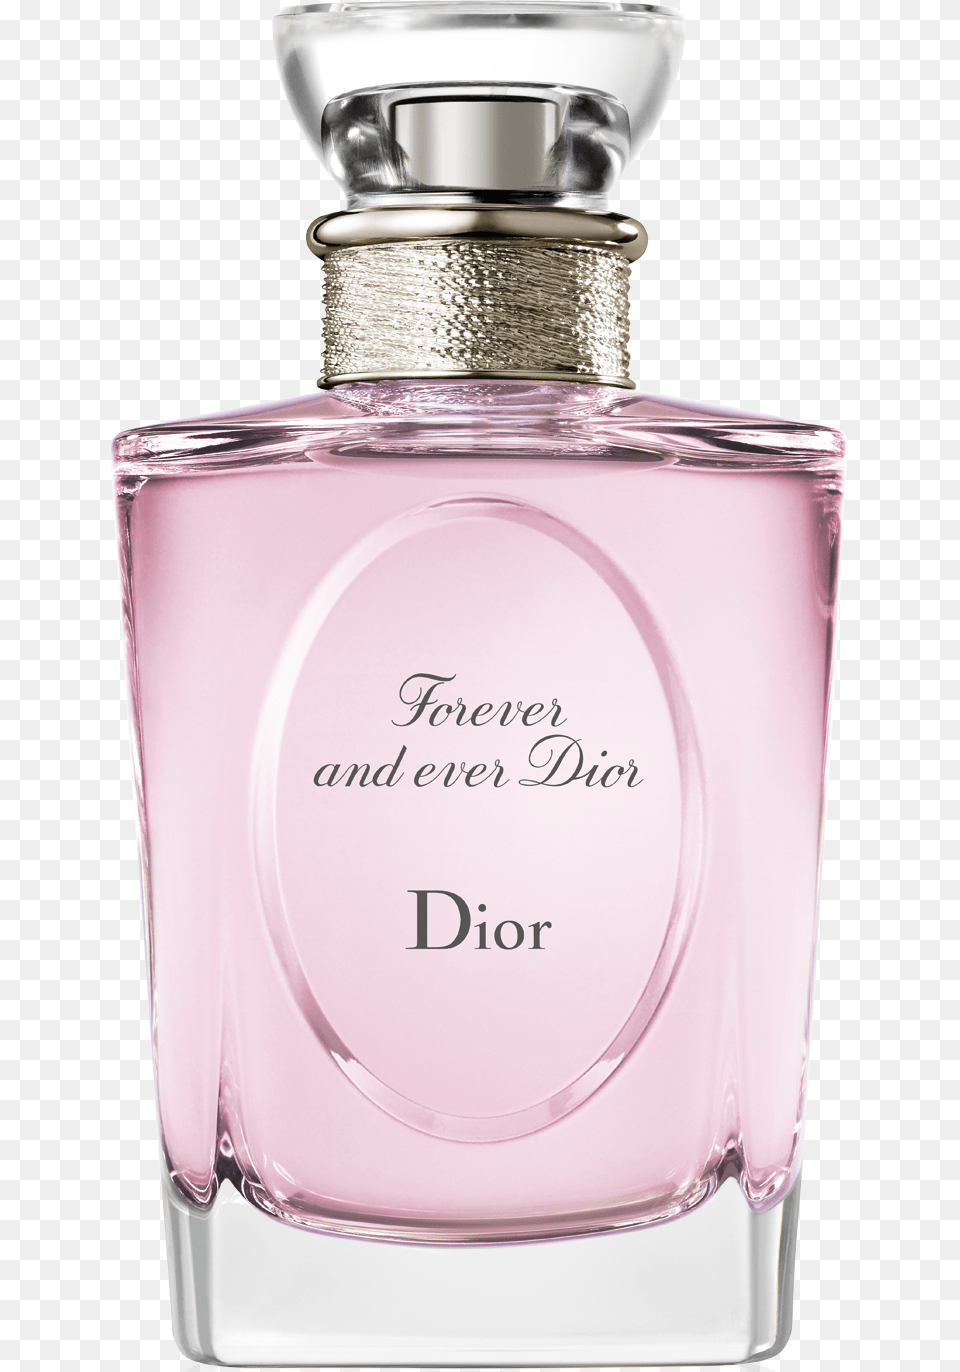 Duhi Dior Forever And Ever, Bottle, Cosmetics, Perfume Png Image